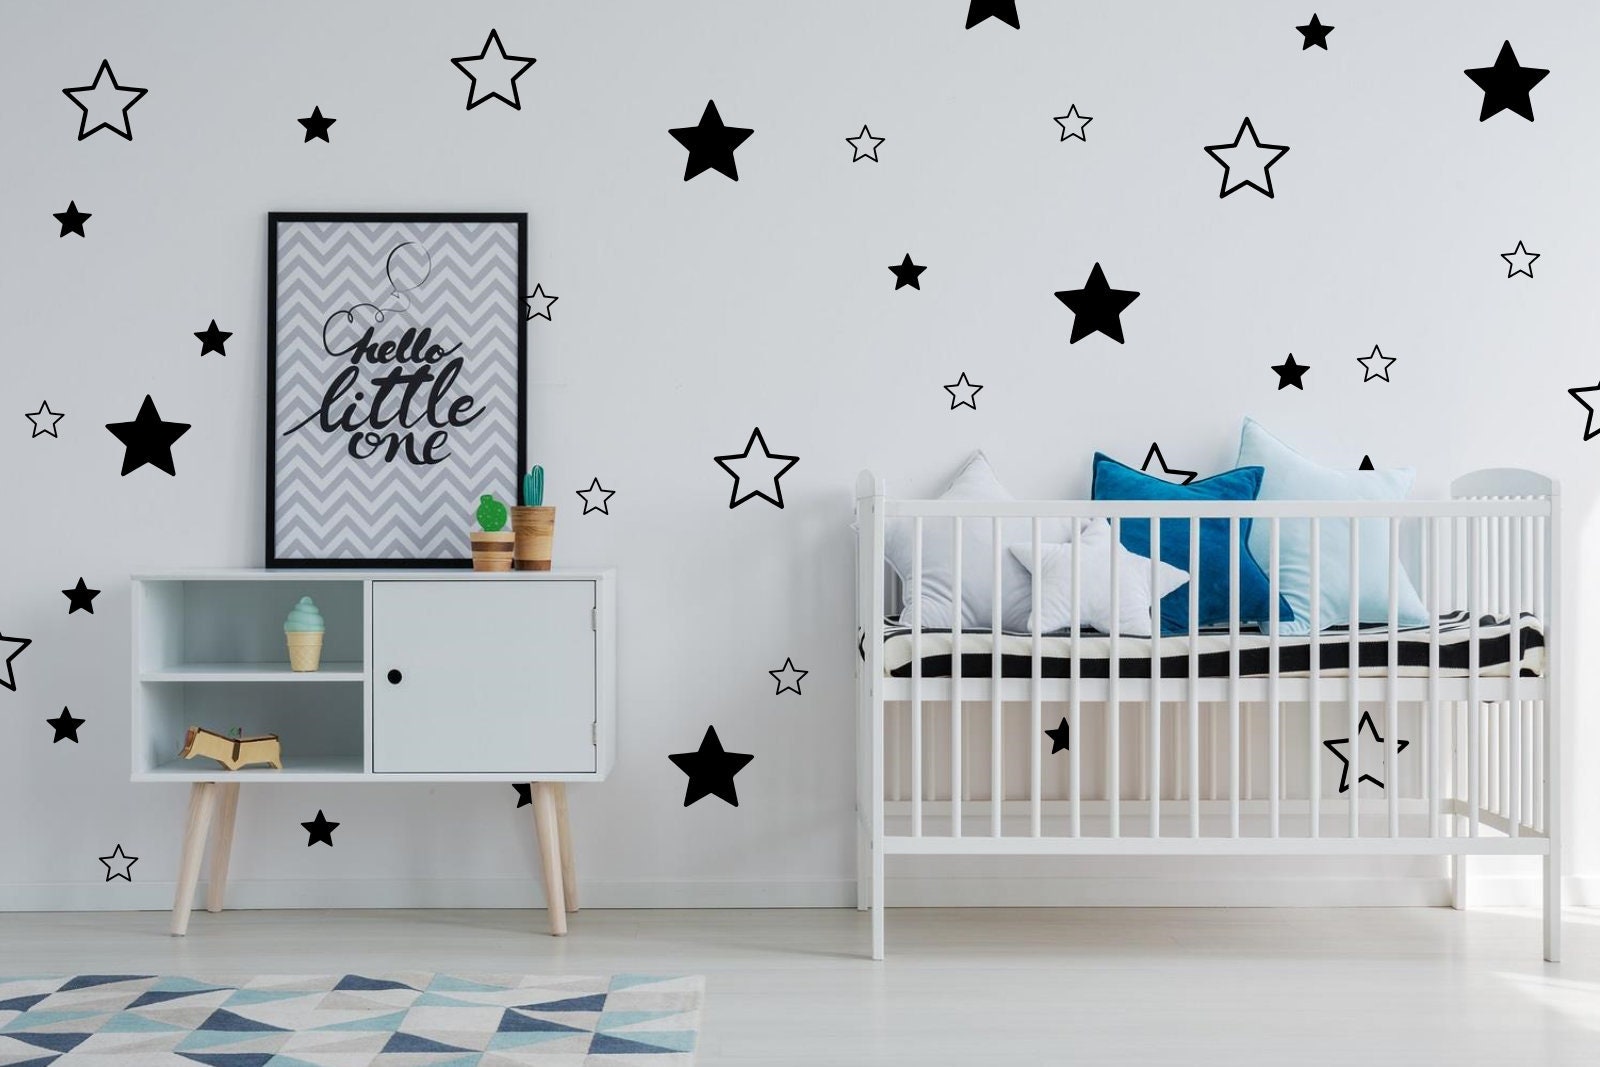 Vintage Silver Star Decals Nursery Decals Removable Peel&Stick Wall Decals Star Wall Decals 144 Count 